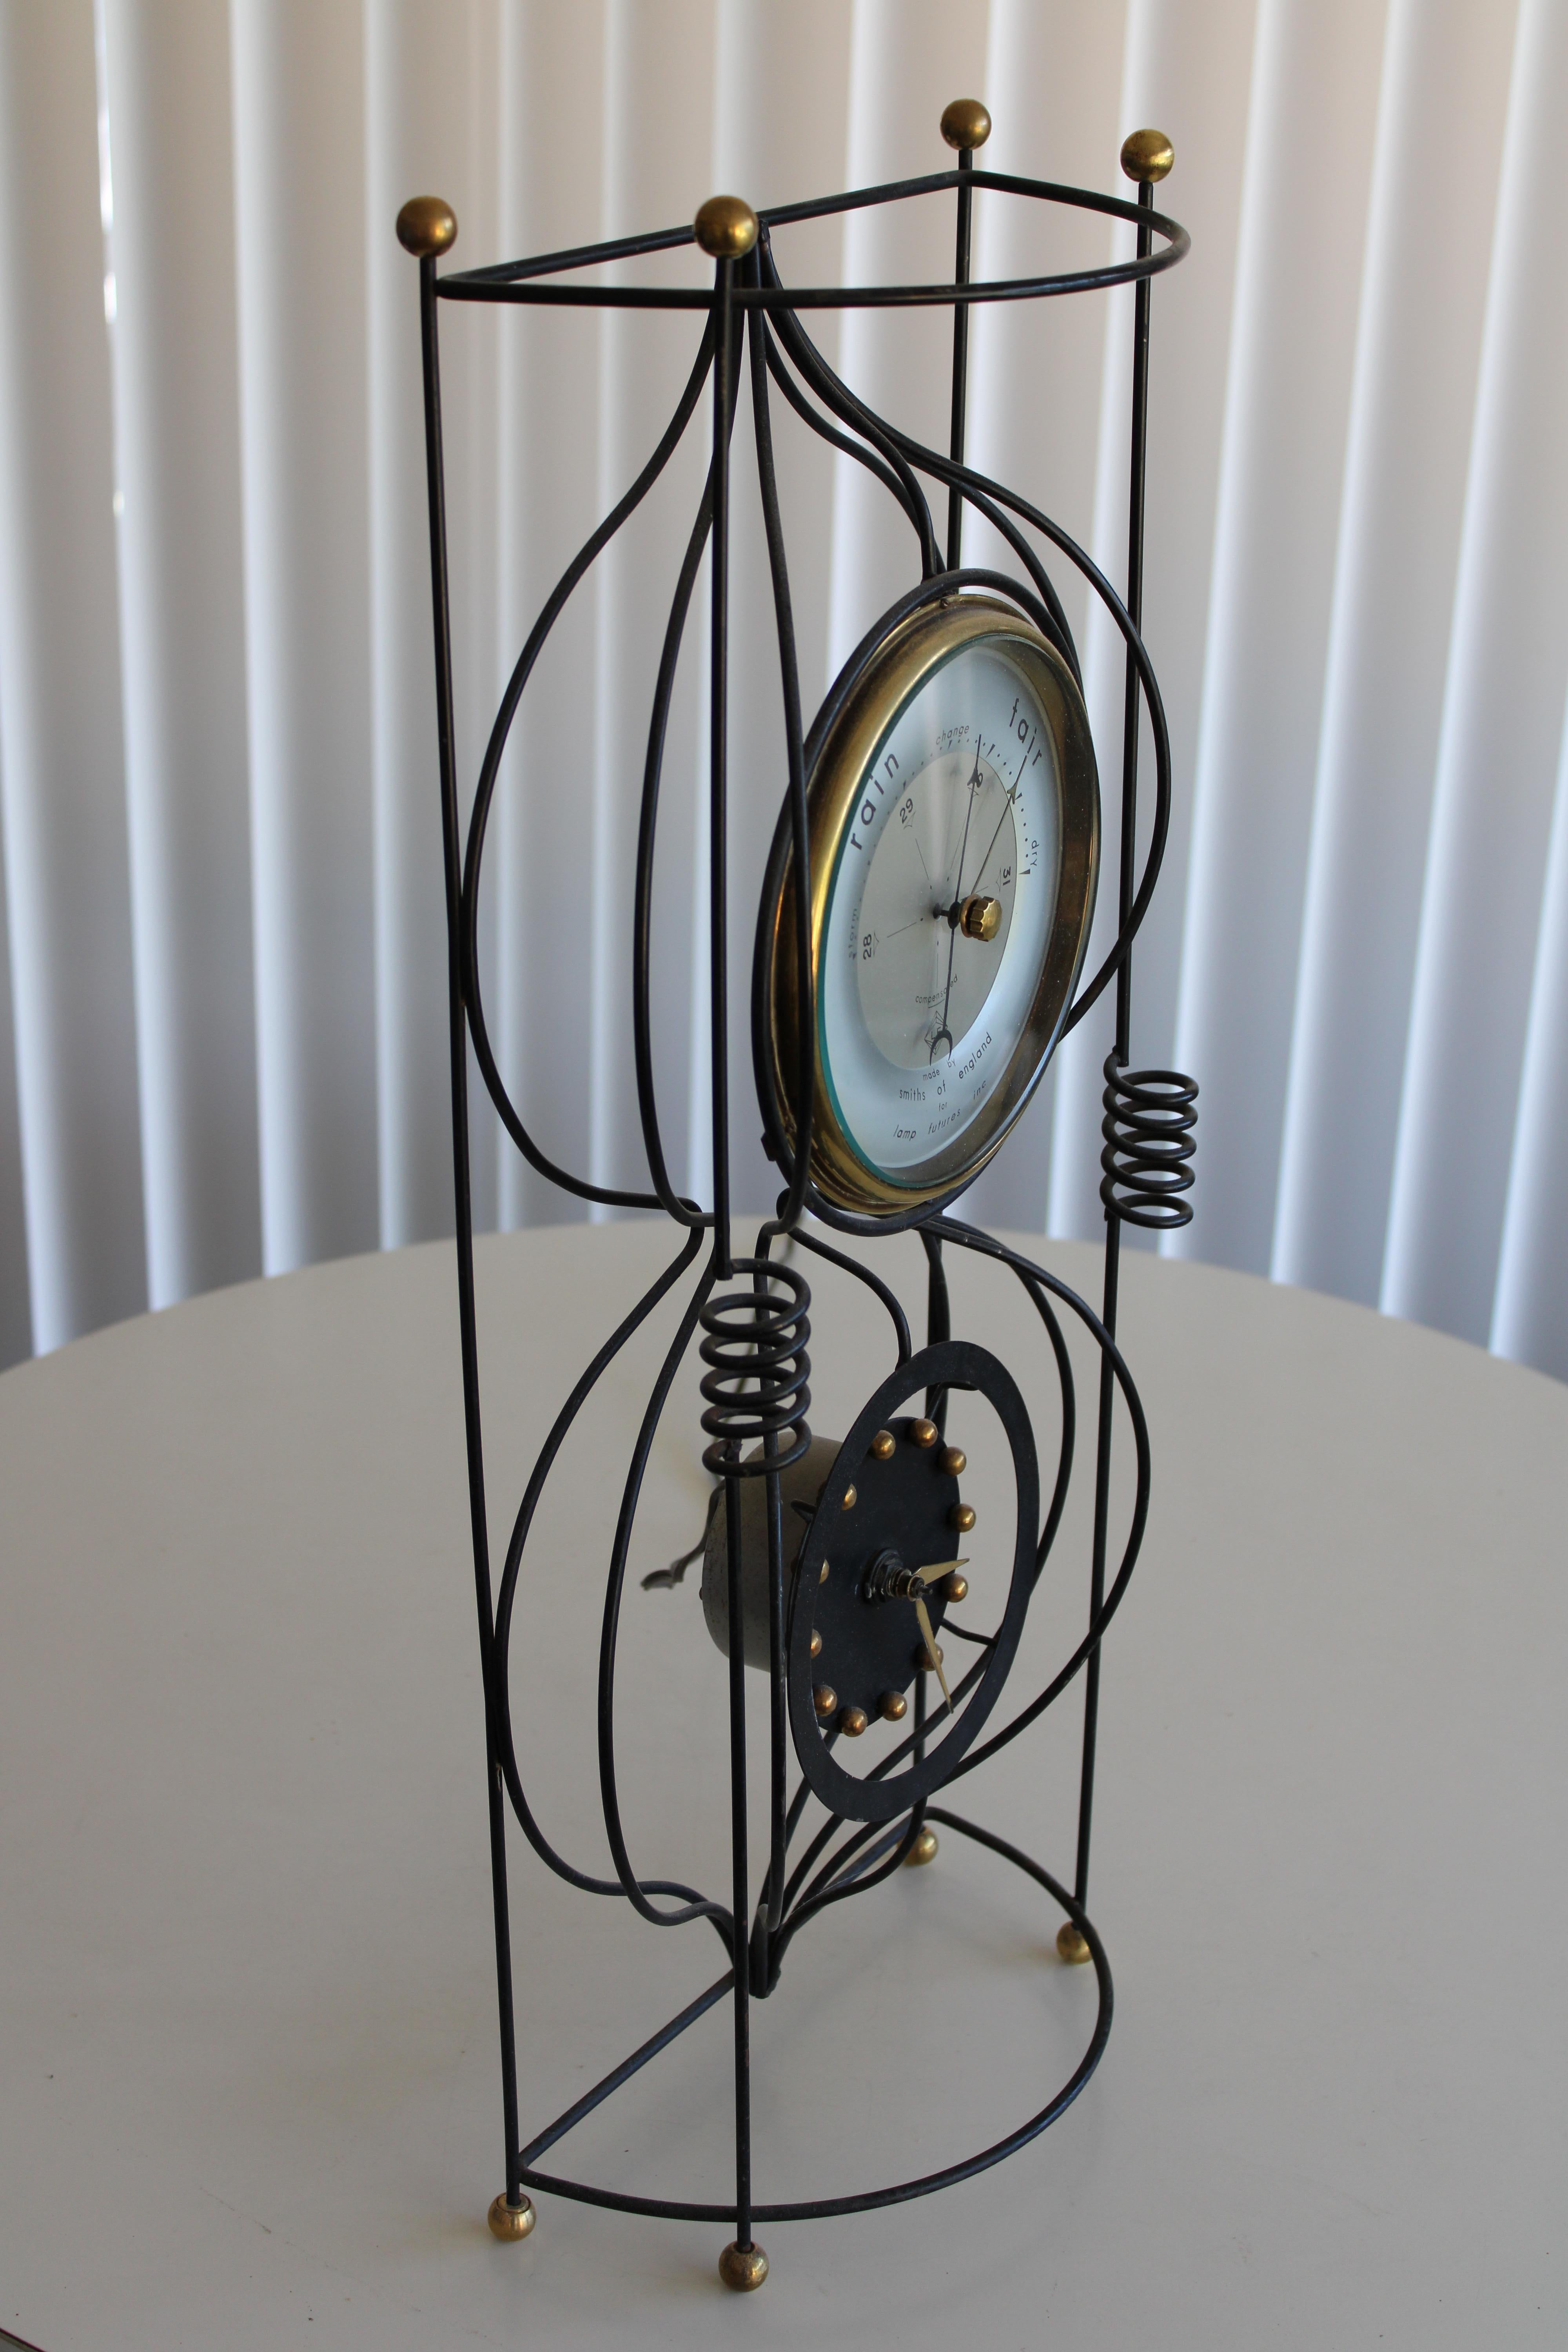 A mid-century atomic style clock barometer combo. Black wrought iron frame with solid brass spheres top and bottom and marking the hours. Barometer is marked Smiths of England for Lamp Futures Inc. Electric clock keeps perfect time and runs quietly.